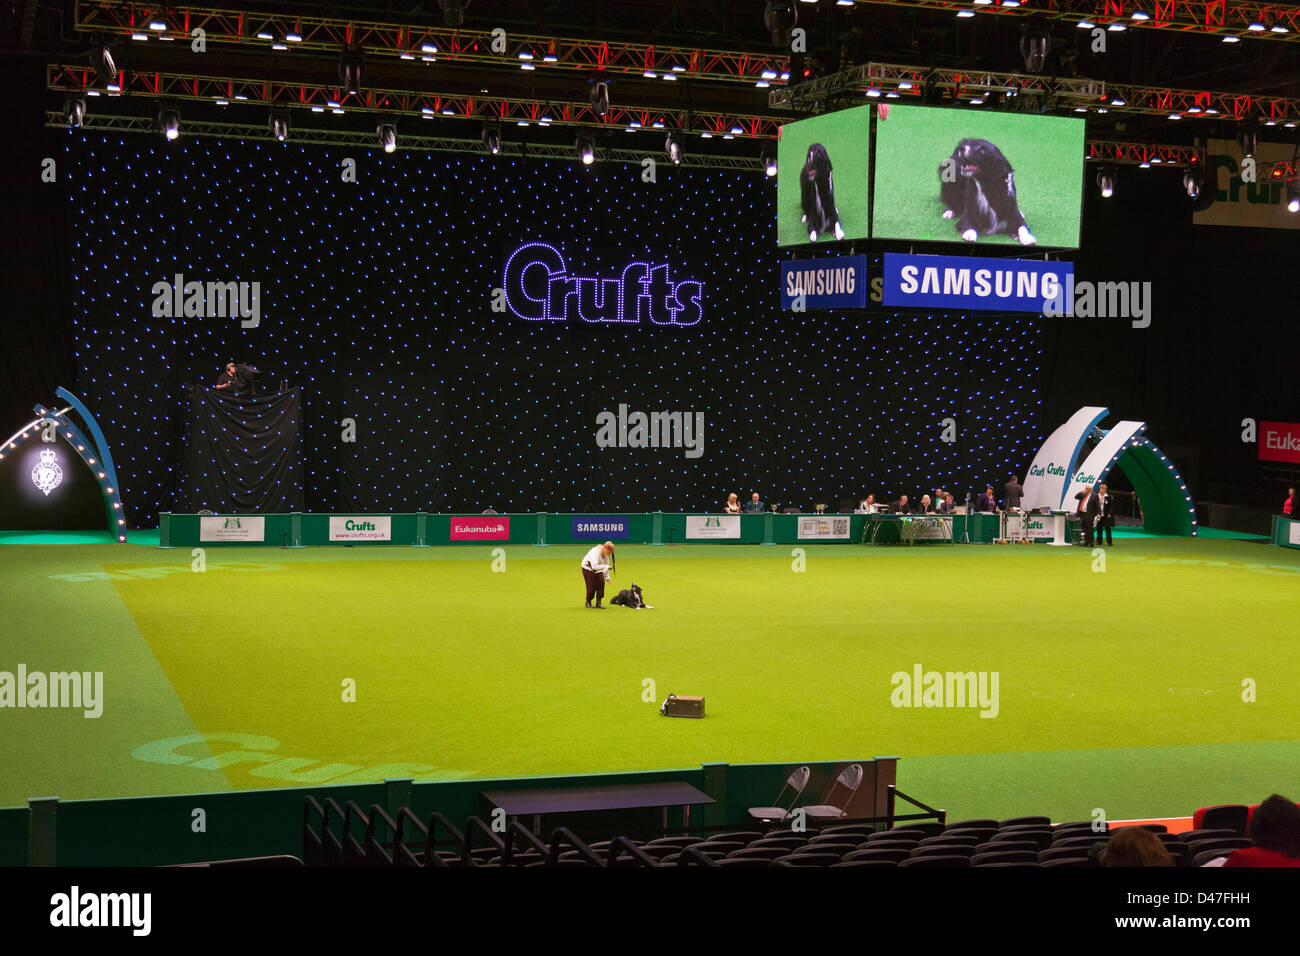 Birmingham, UK. 7th March 2013. Crufts 2013 dog show in NEC national exhibition centre Birmingham UK England day one of the  premier dog show and competition showing in main arena. Credit:  Paul Thompson Live News / Alamy Live News Stock Photo